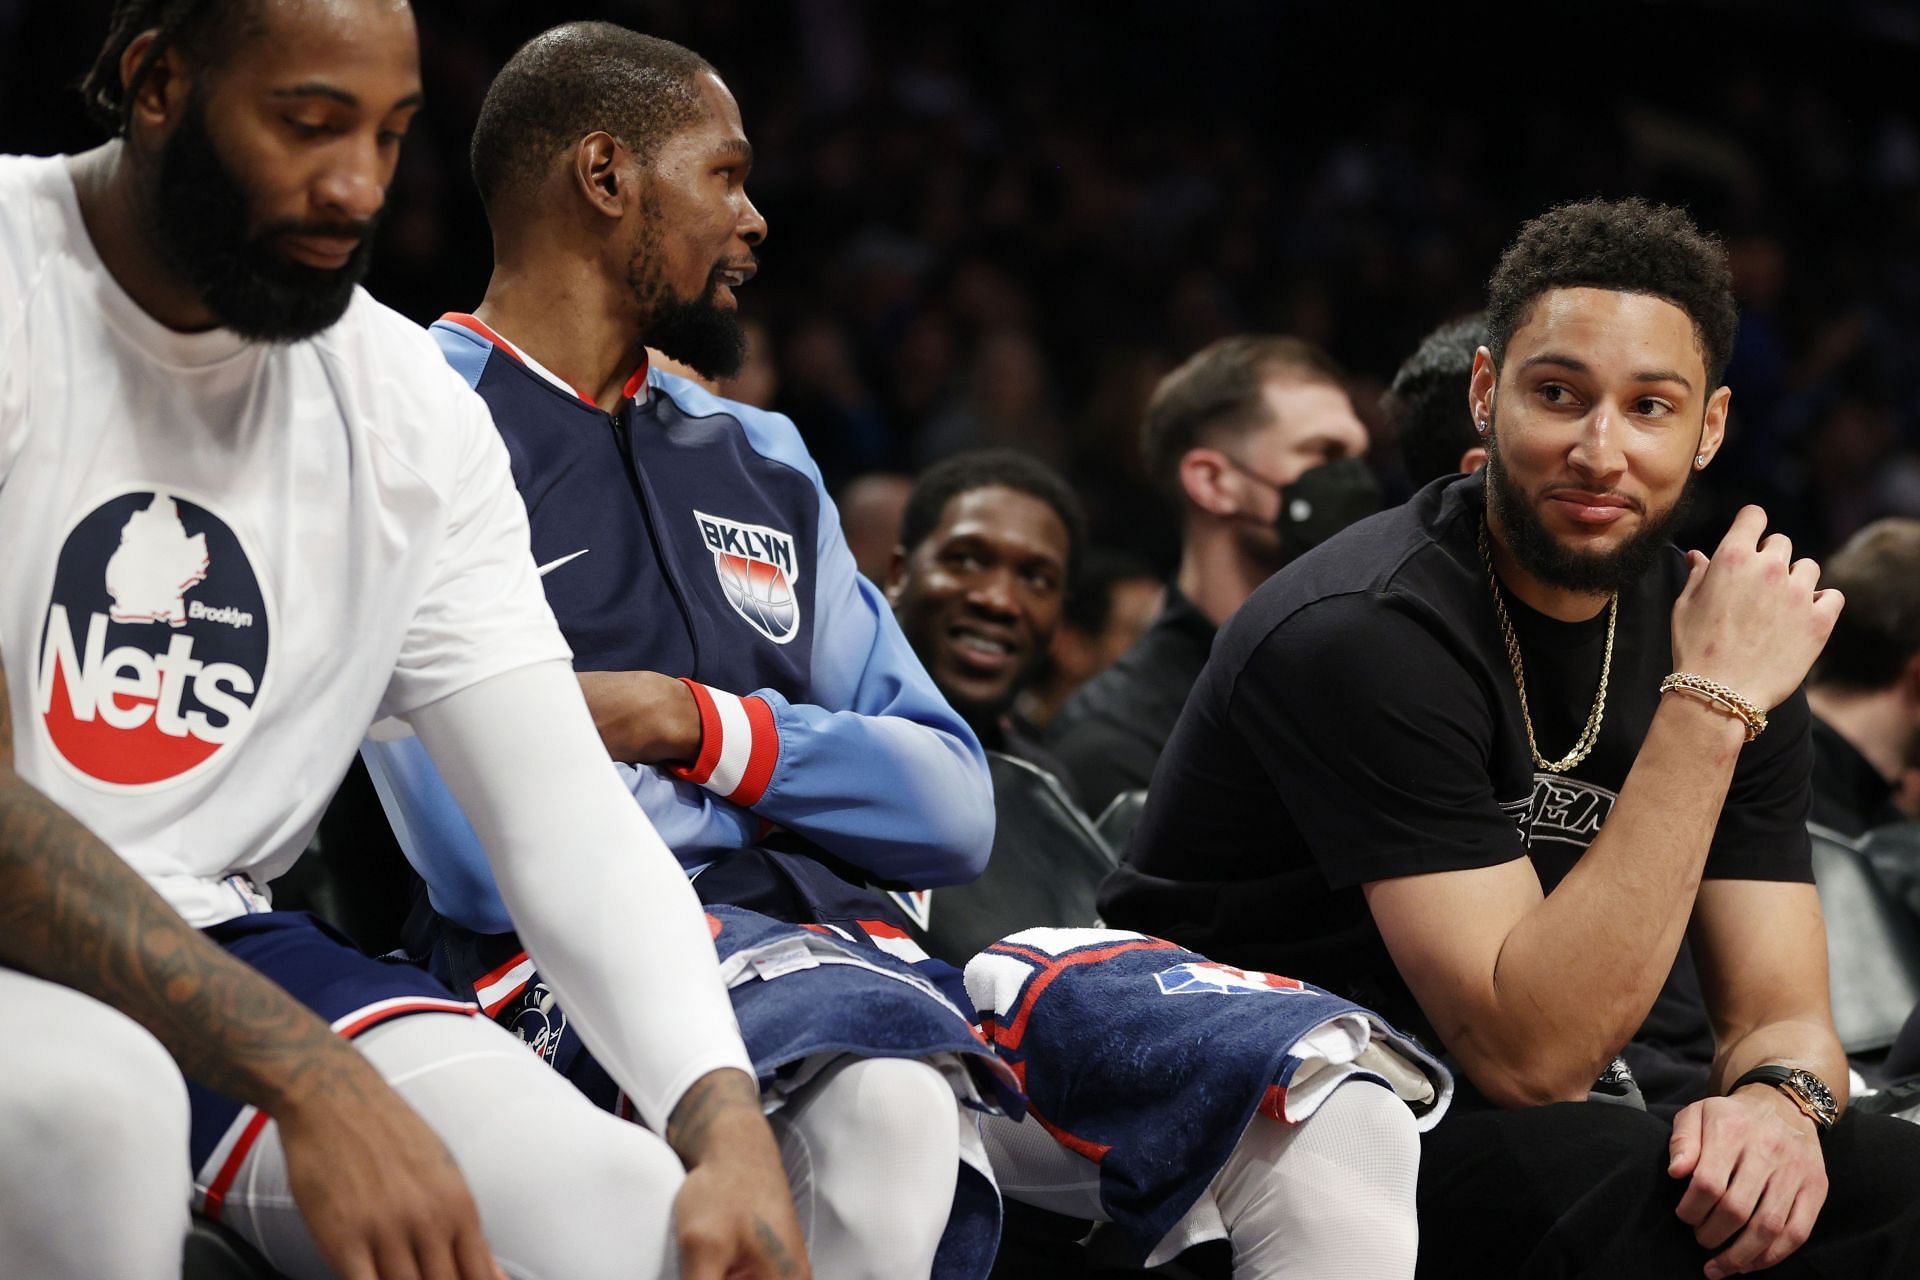 Brooklyn Nets Simmons on the bench.